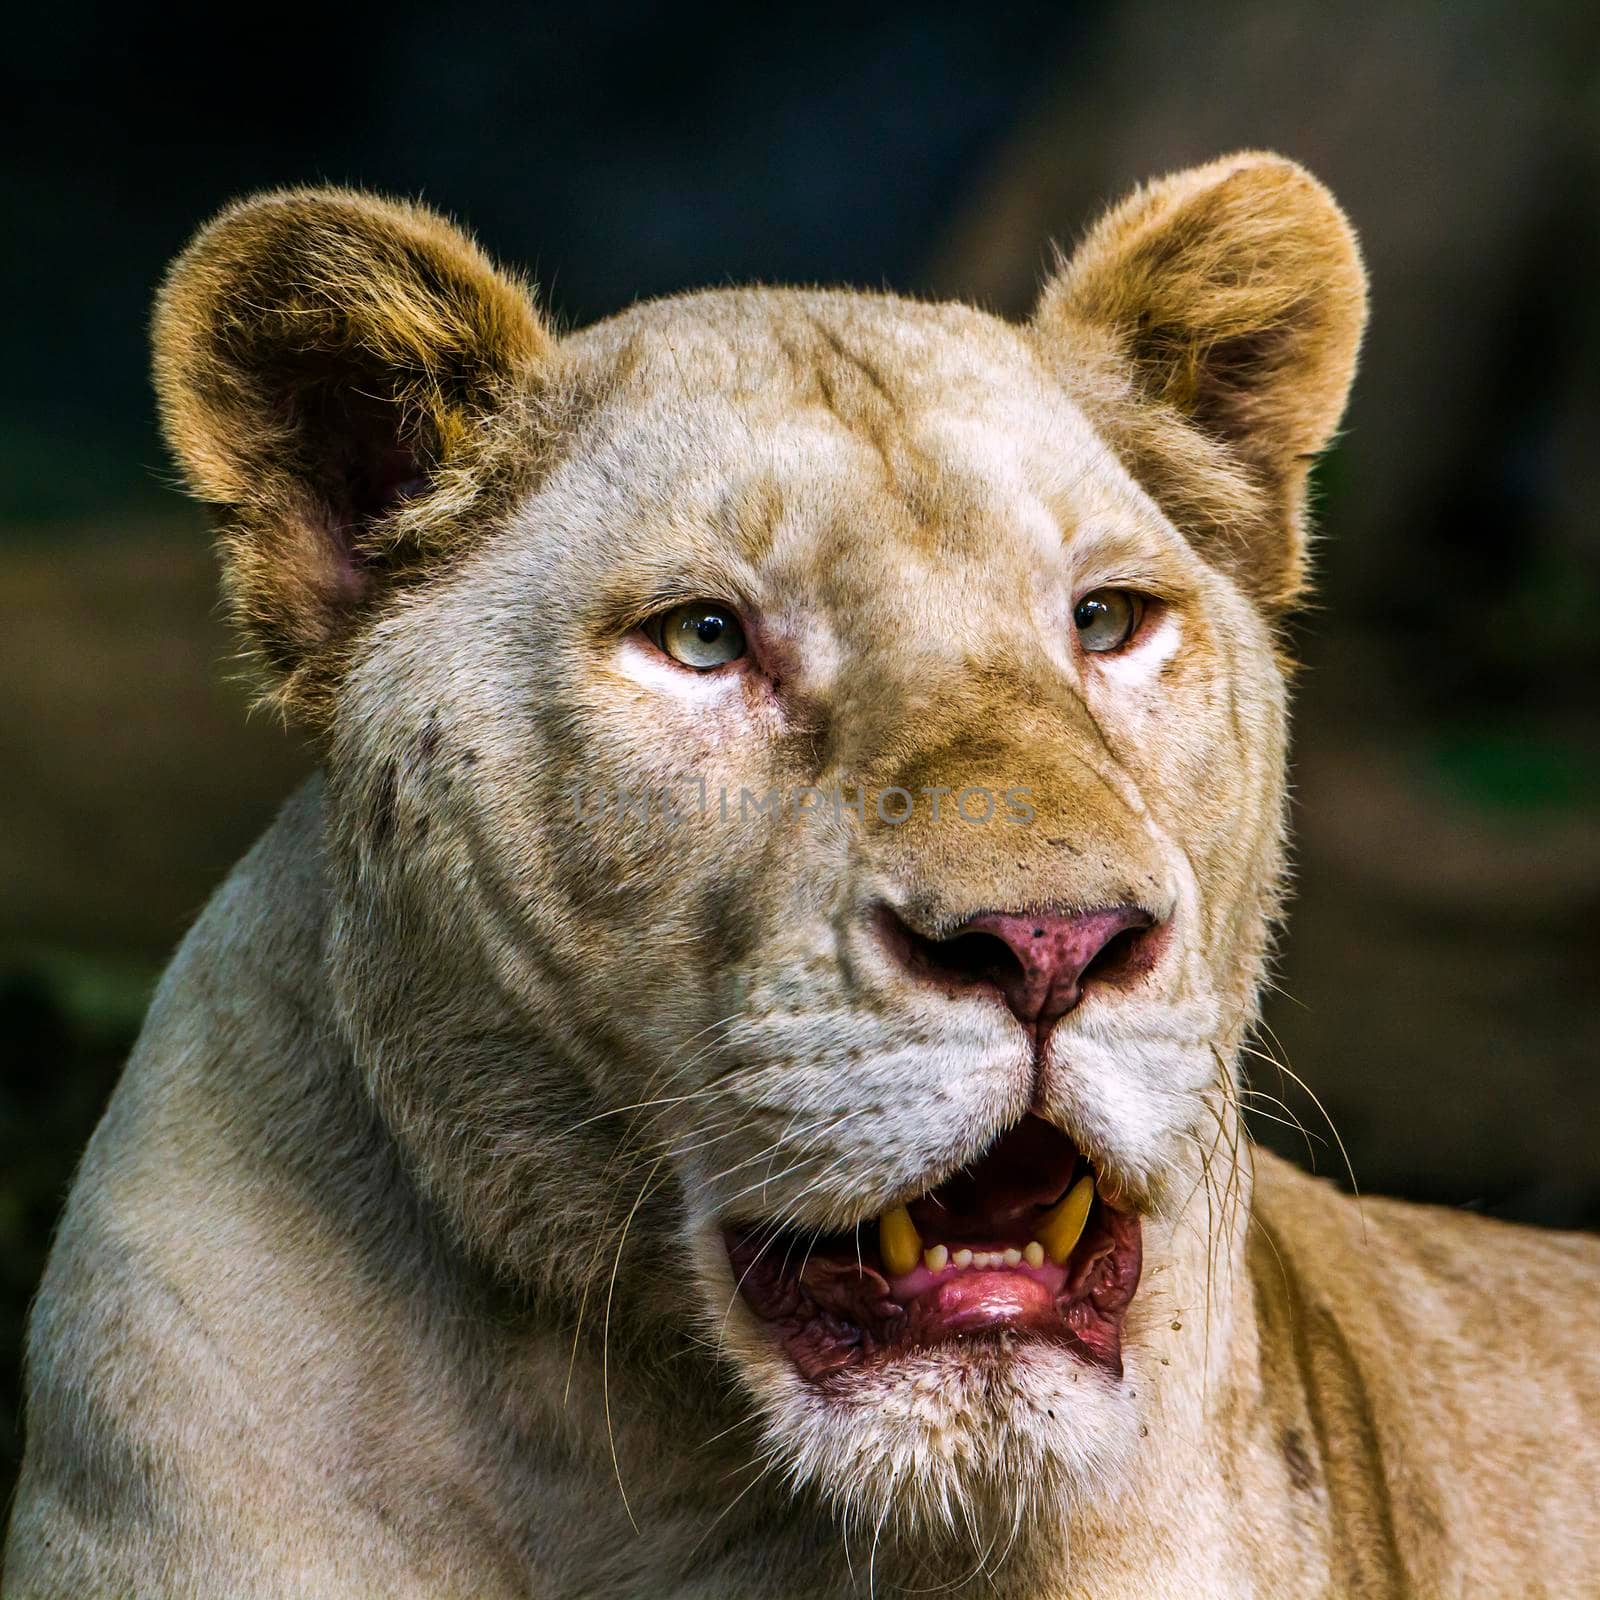 African white lioness in Chiang Mai zoo, Thailand by PACOCOMO